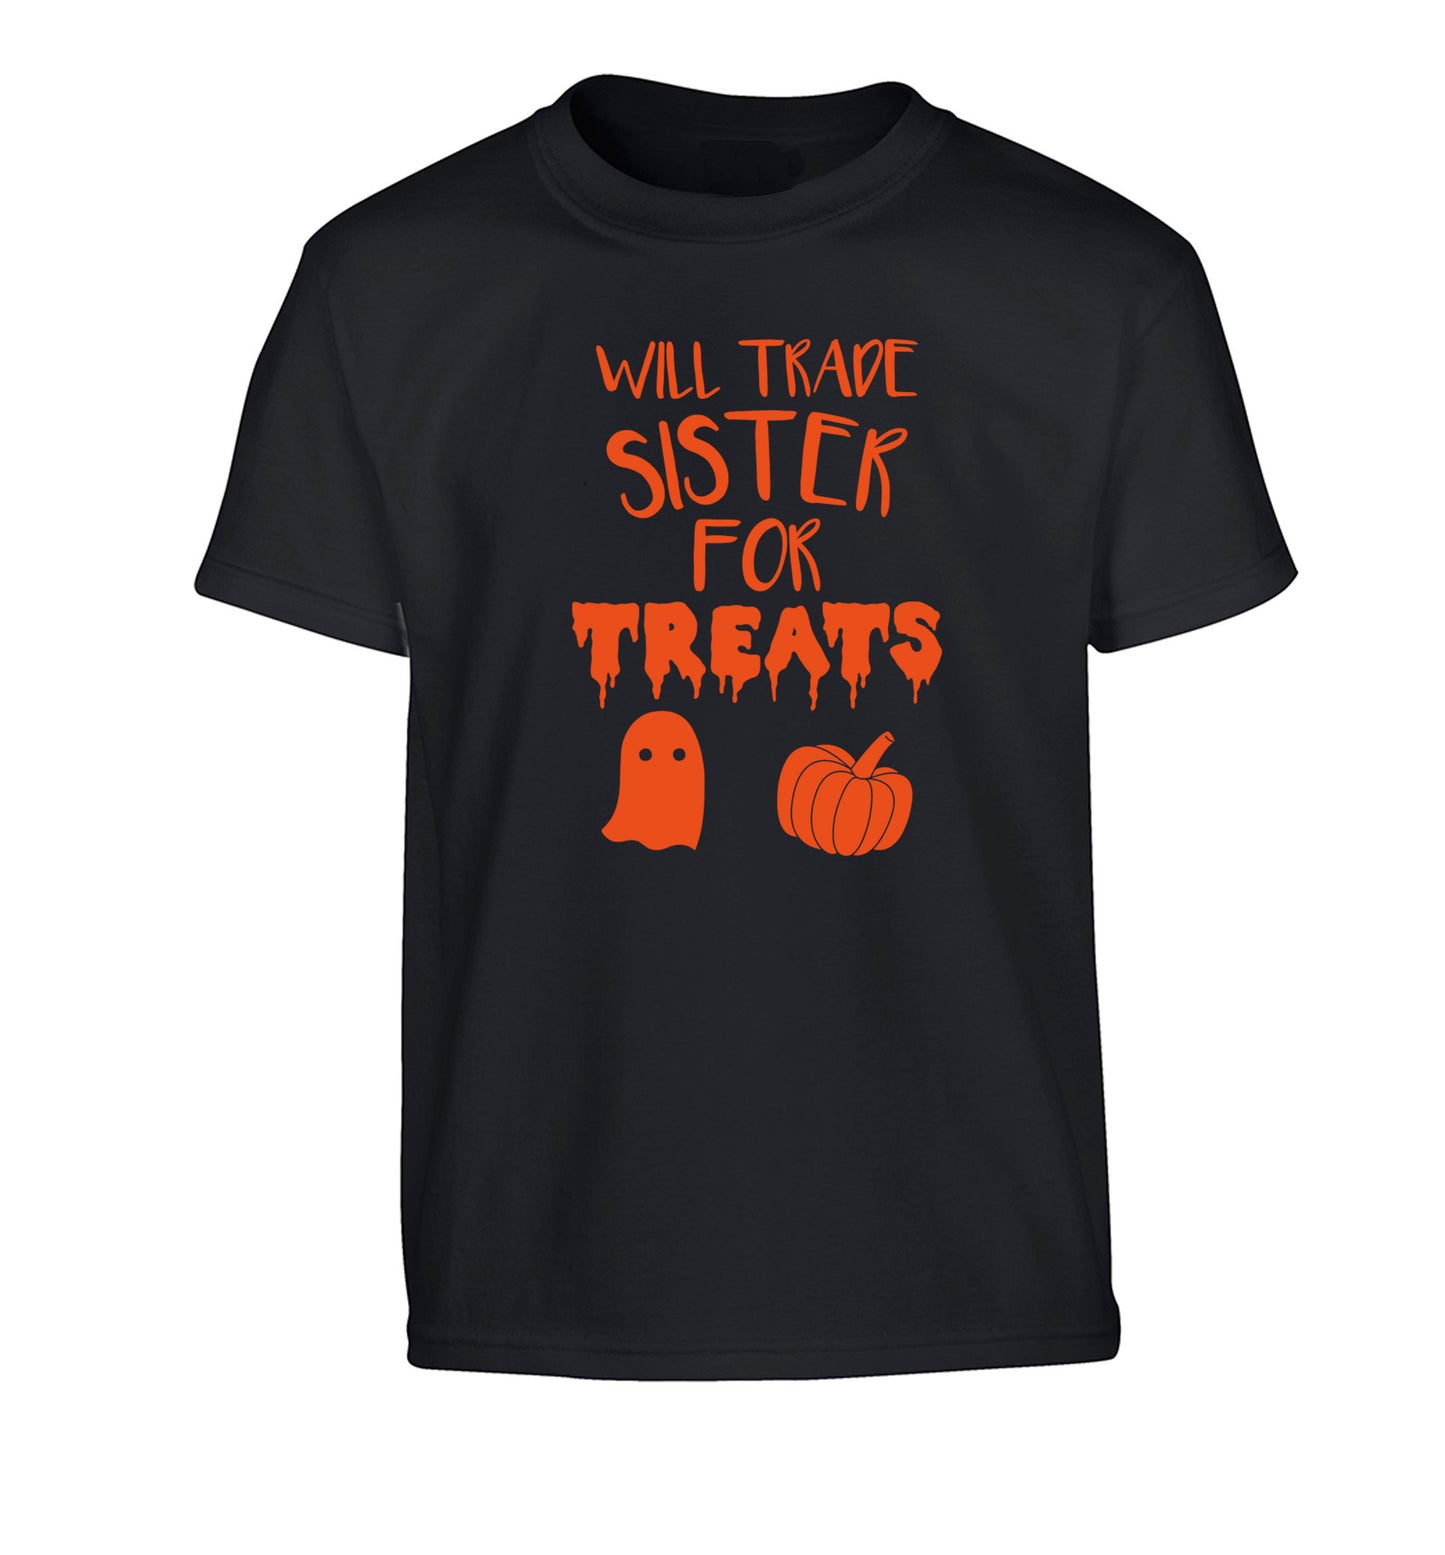 Will trade sister for treats Children's black Tshirt 12-14 Years